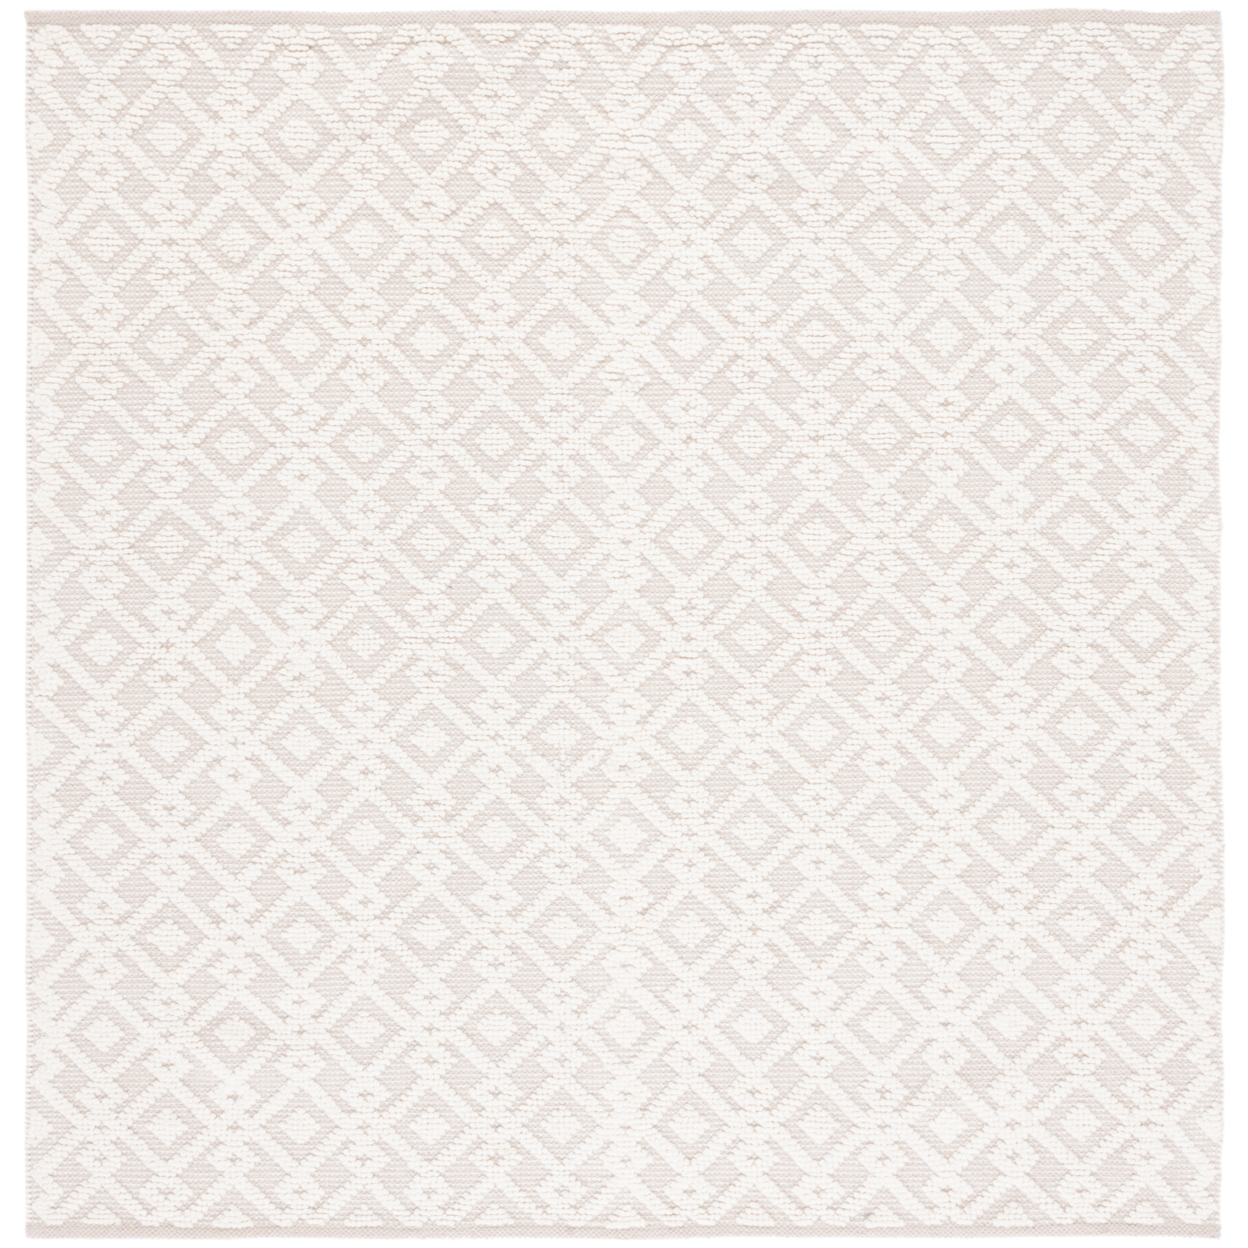 SAFAVIEH Vermont Collection VRM102A Handwoven Ivory Rug - 6 X 6 Square